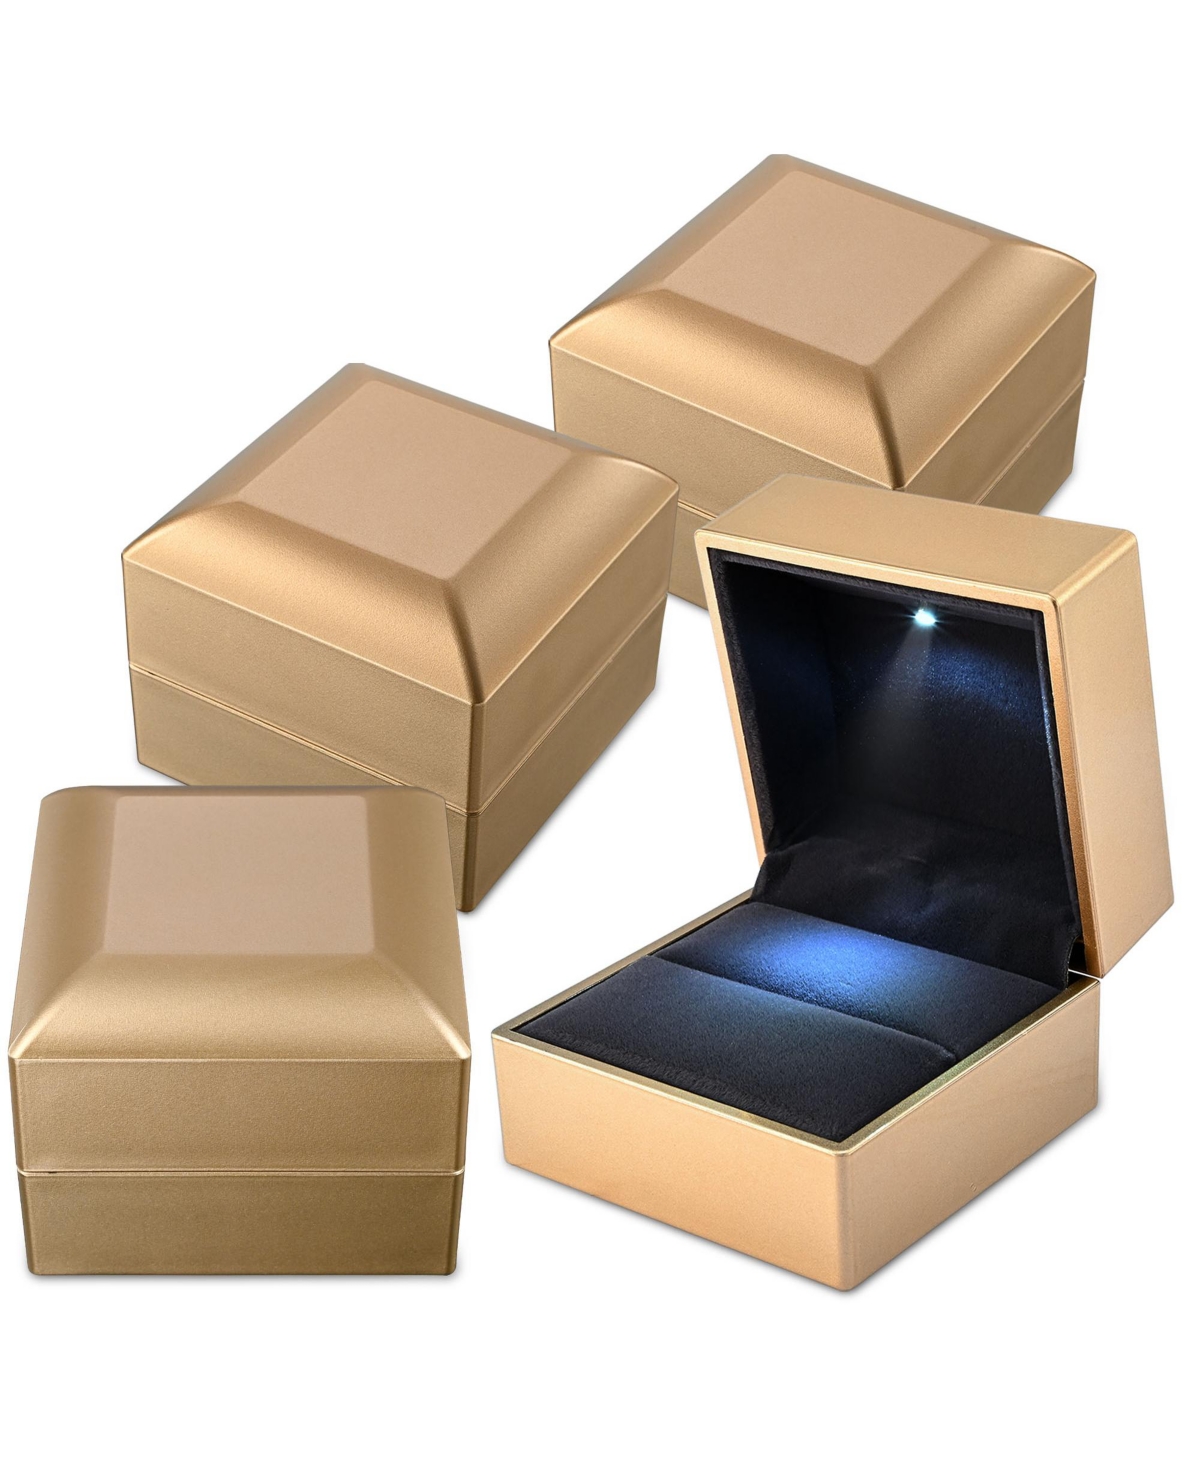 Led Ring Box Jewelry Wedding Engagement Proposal Lighted Pin Coin Case 4 Pack - Gold